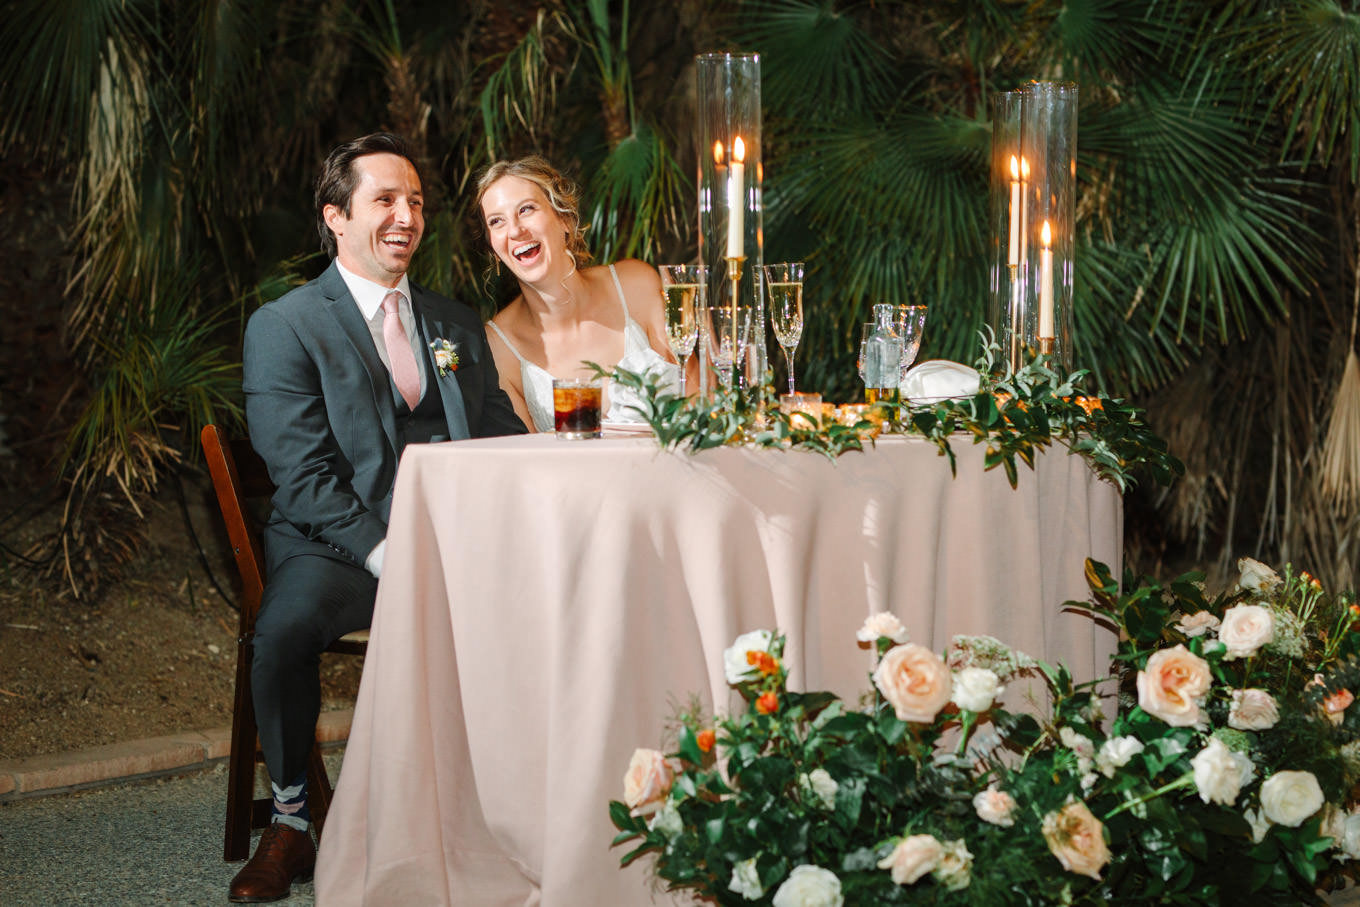 Bride and groom laughing at sweetheart table | Living Desert Zoo & Gardens wedding with unique details | Elevated and colorful wedding photography for fun-loving couples in Southern California |  #PalmSprings #palmspringsphotographer #gardenwedding #palmspringswedding  Source: Mary Costa Photography | Los Angeles wedding photographer 